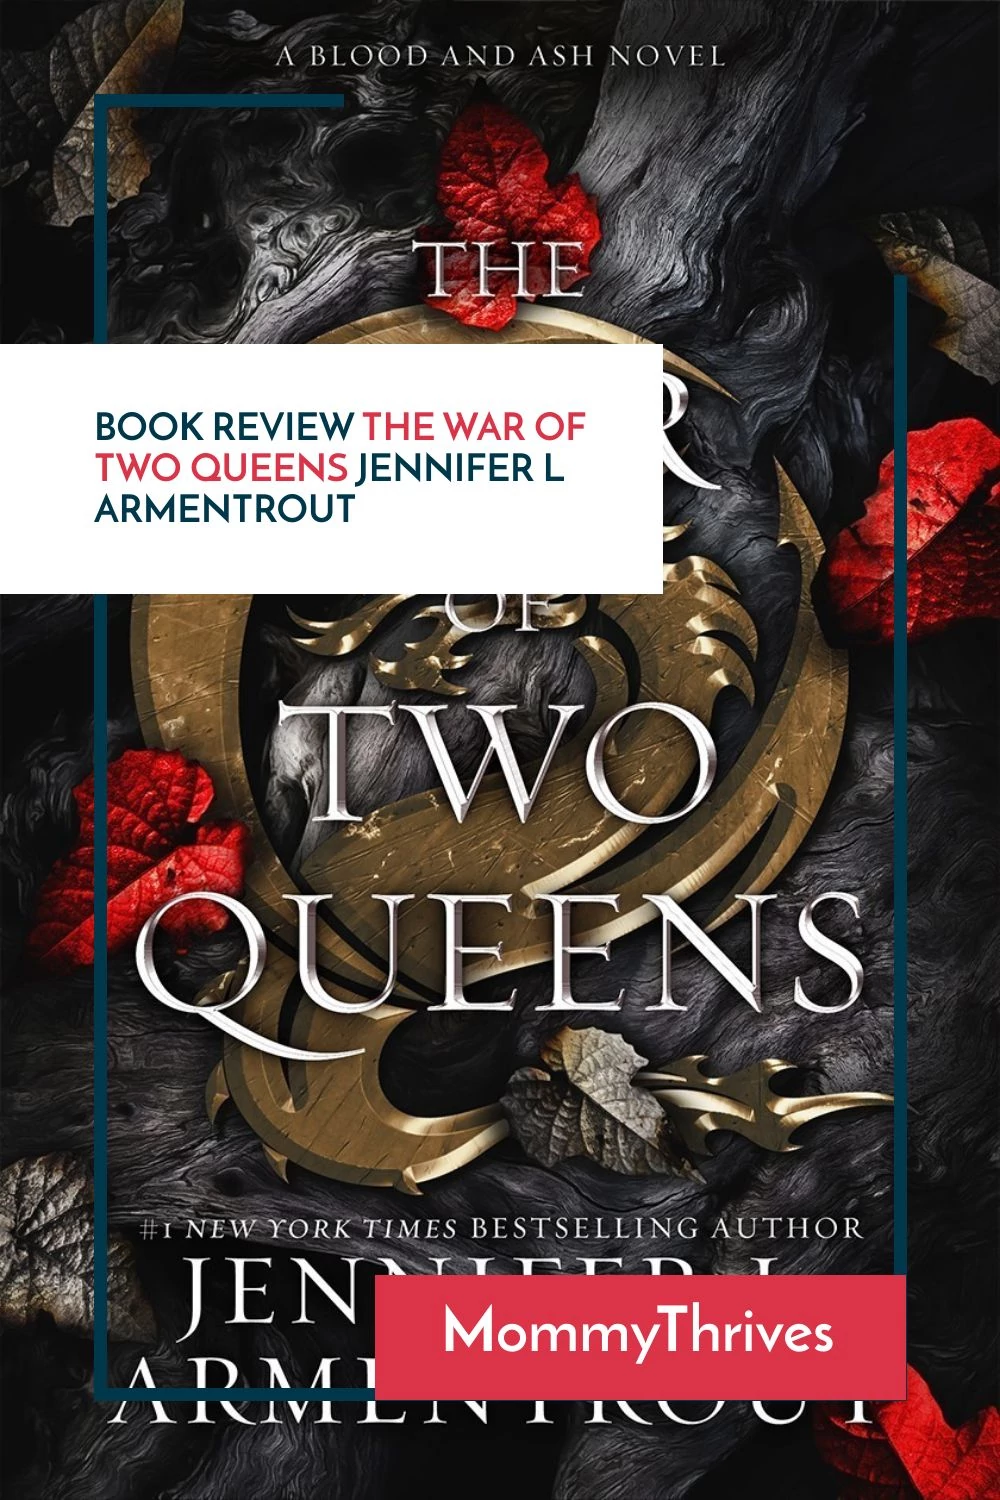 Adult Fantasy Book Review - The War of Two Queens Book Review - Blood and Ash Series by Jennifer L Armentrout